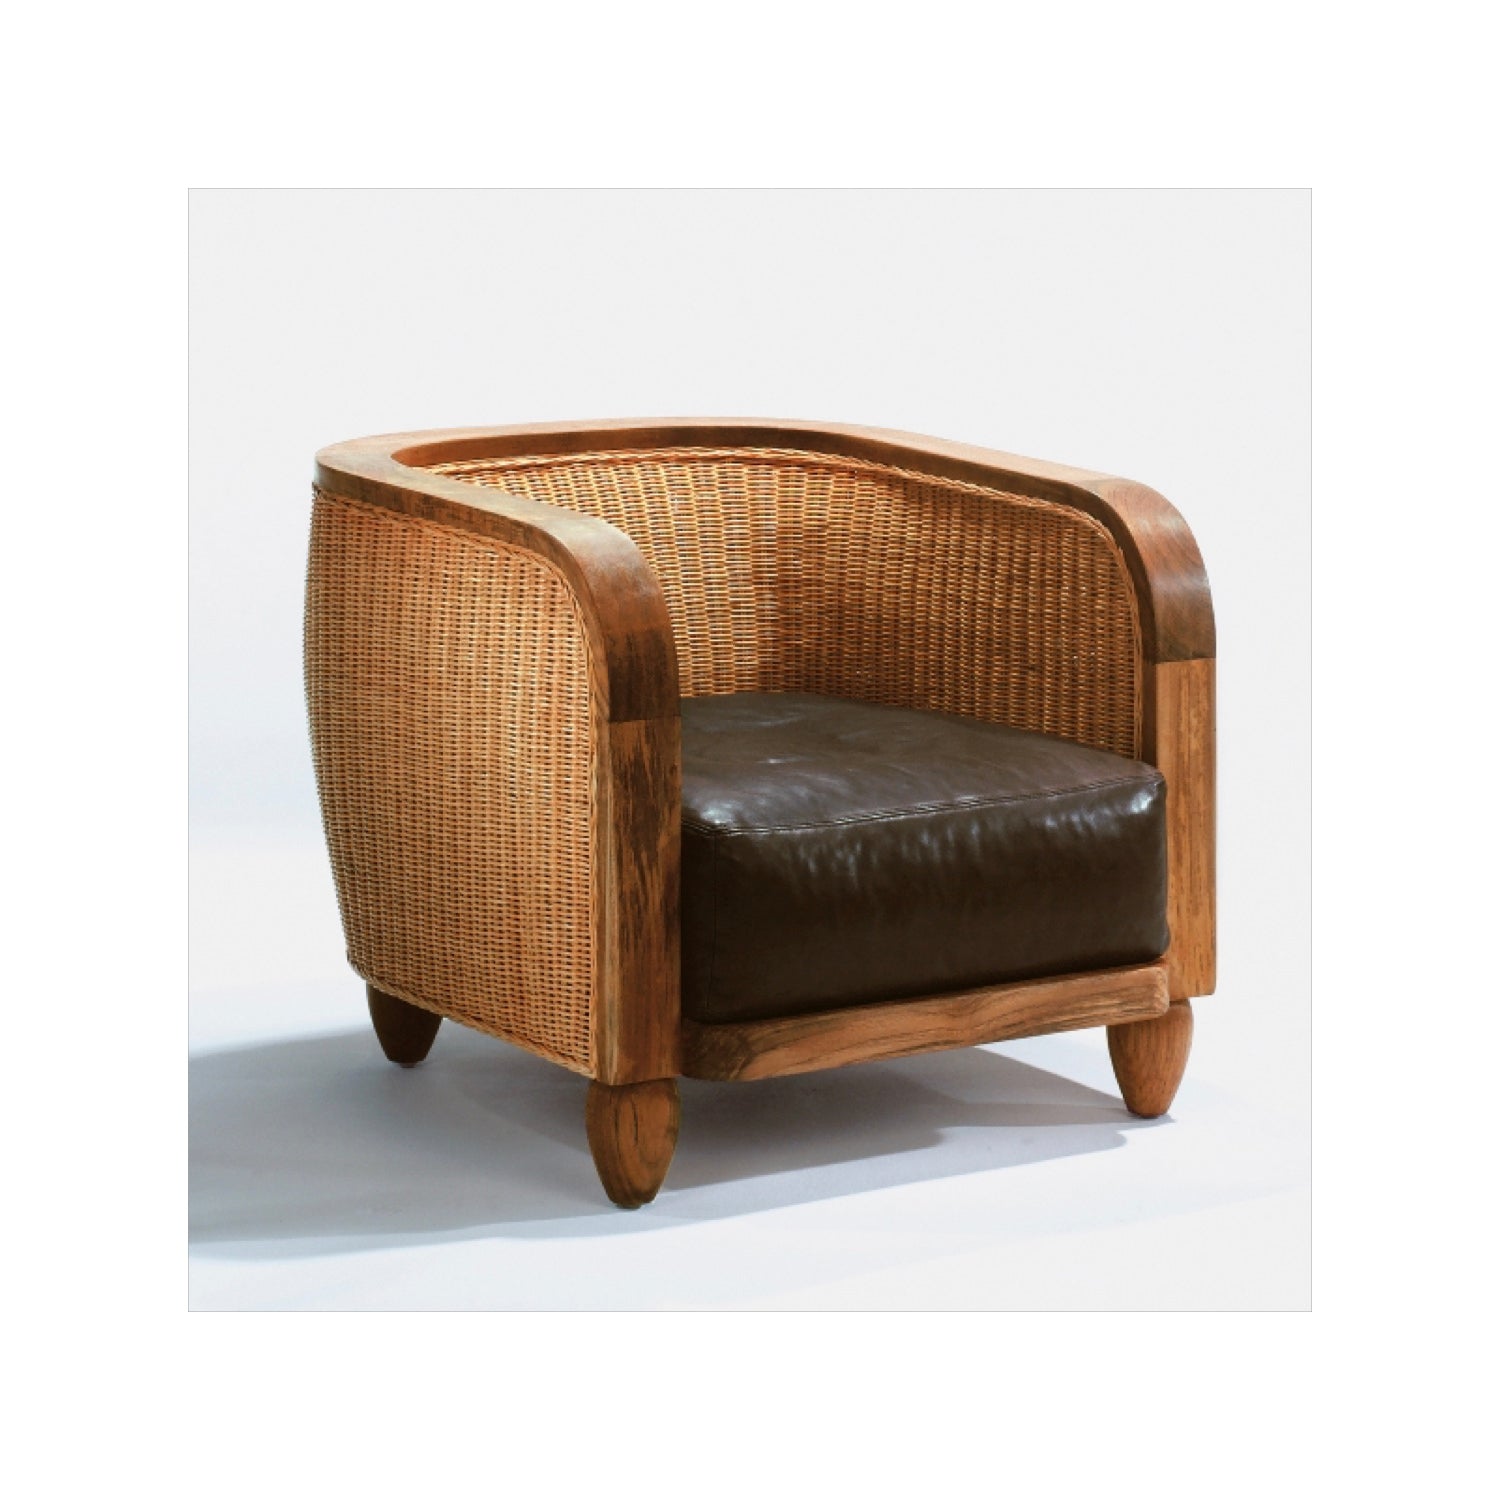 LOBBY armchair Lambert without back cushion